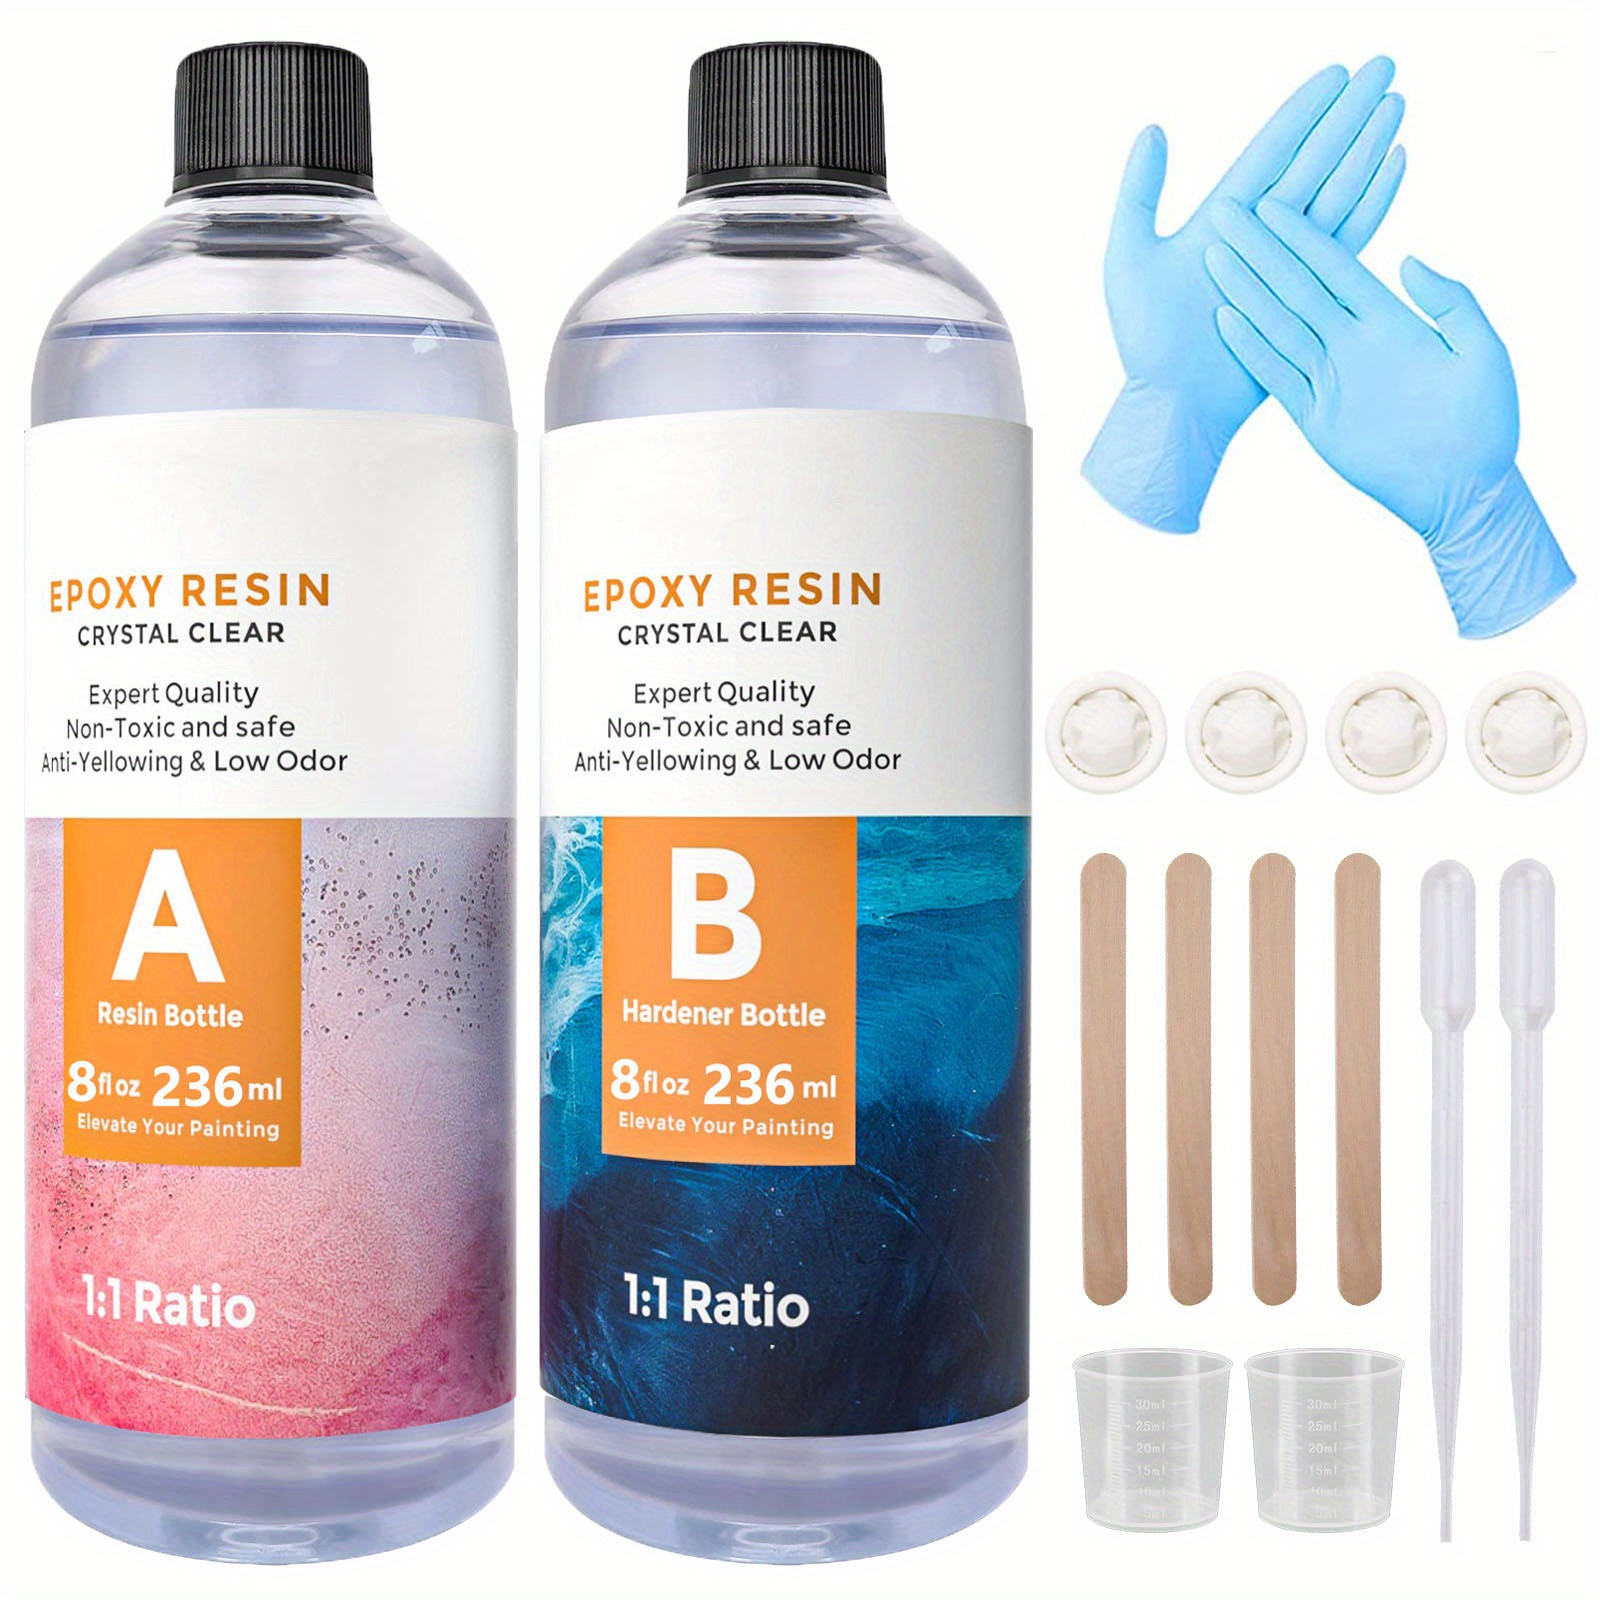 Art Resin Review  No fumes, Crystal Clear Resin 